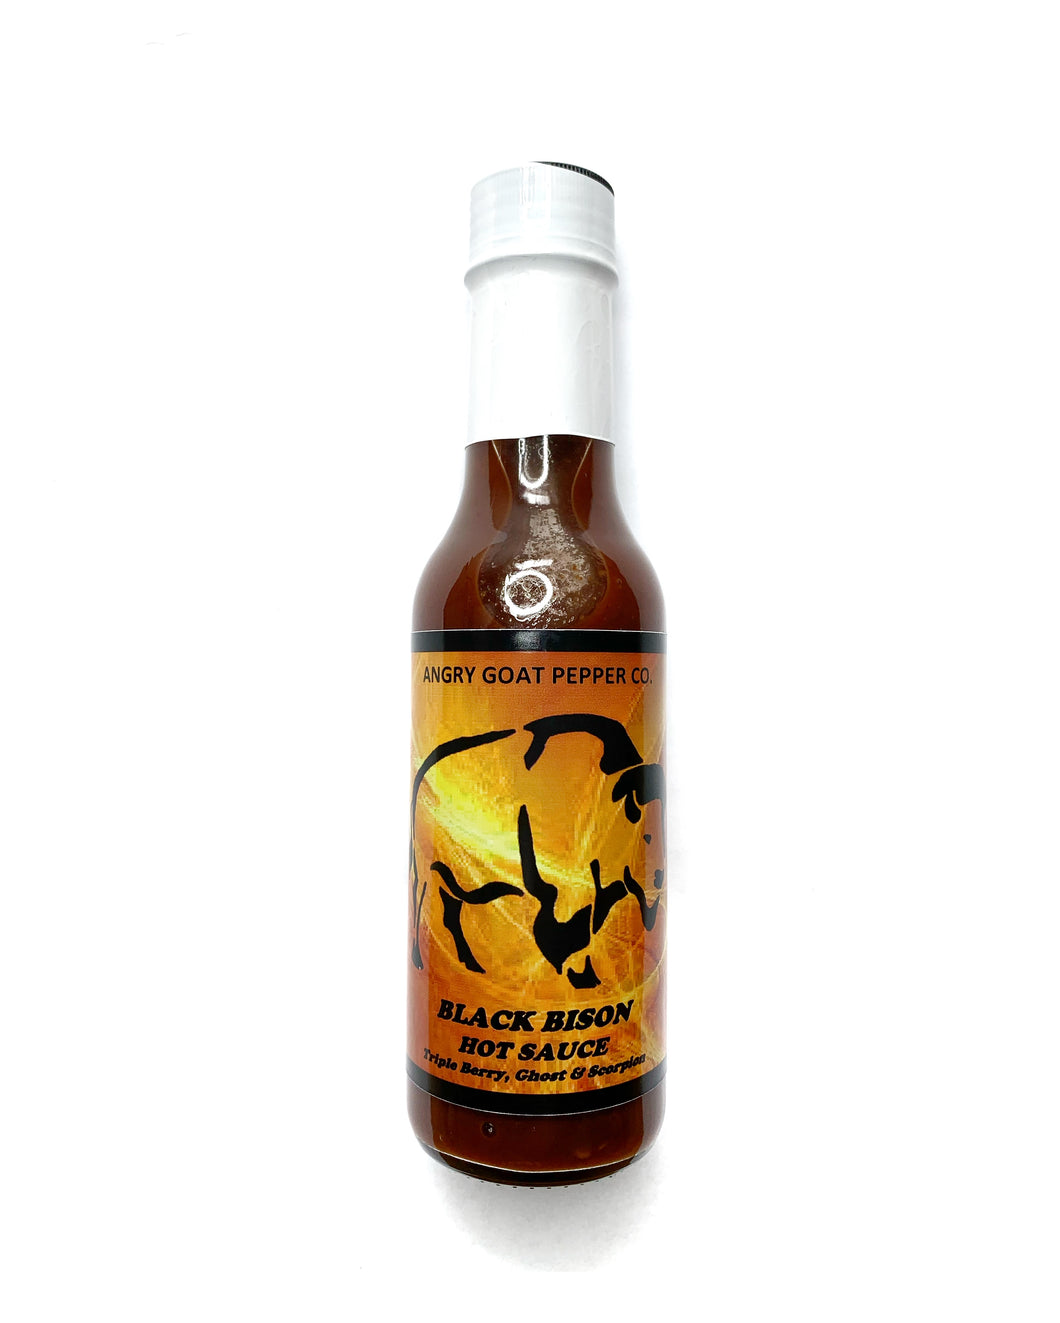 Angry Goat Pepper Co Black Bison Hot Sauce